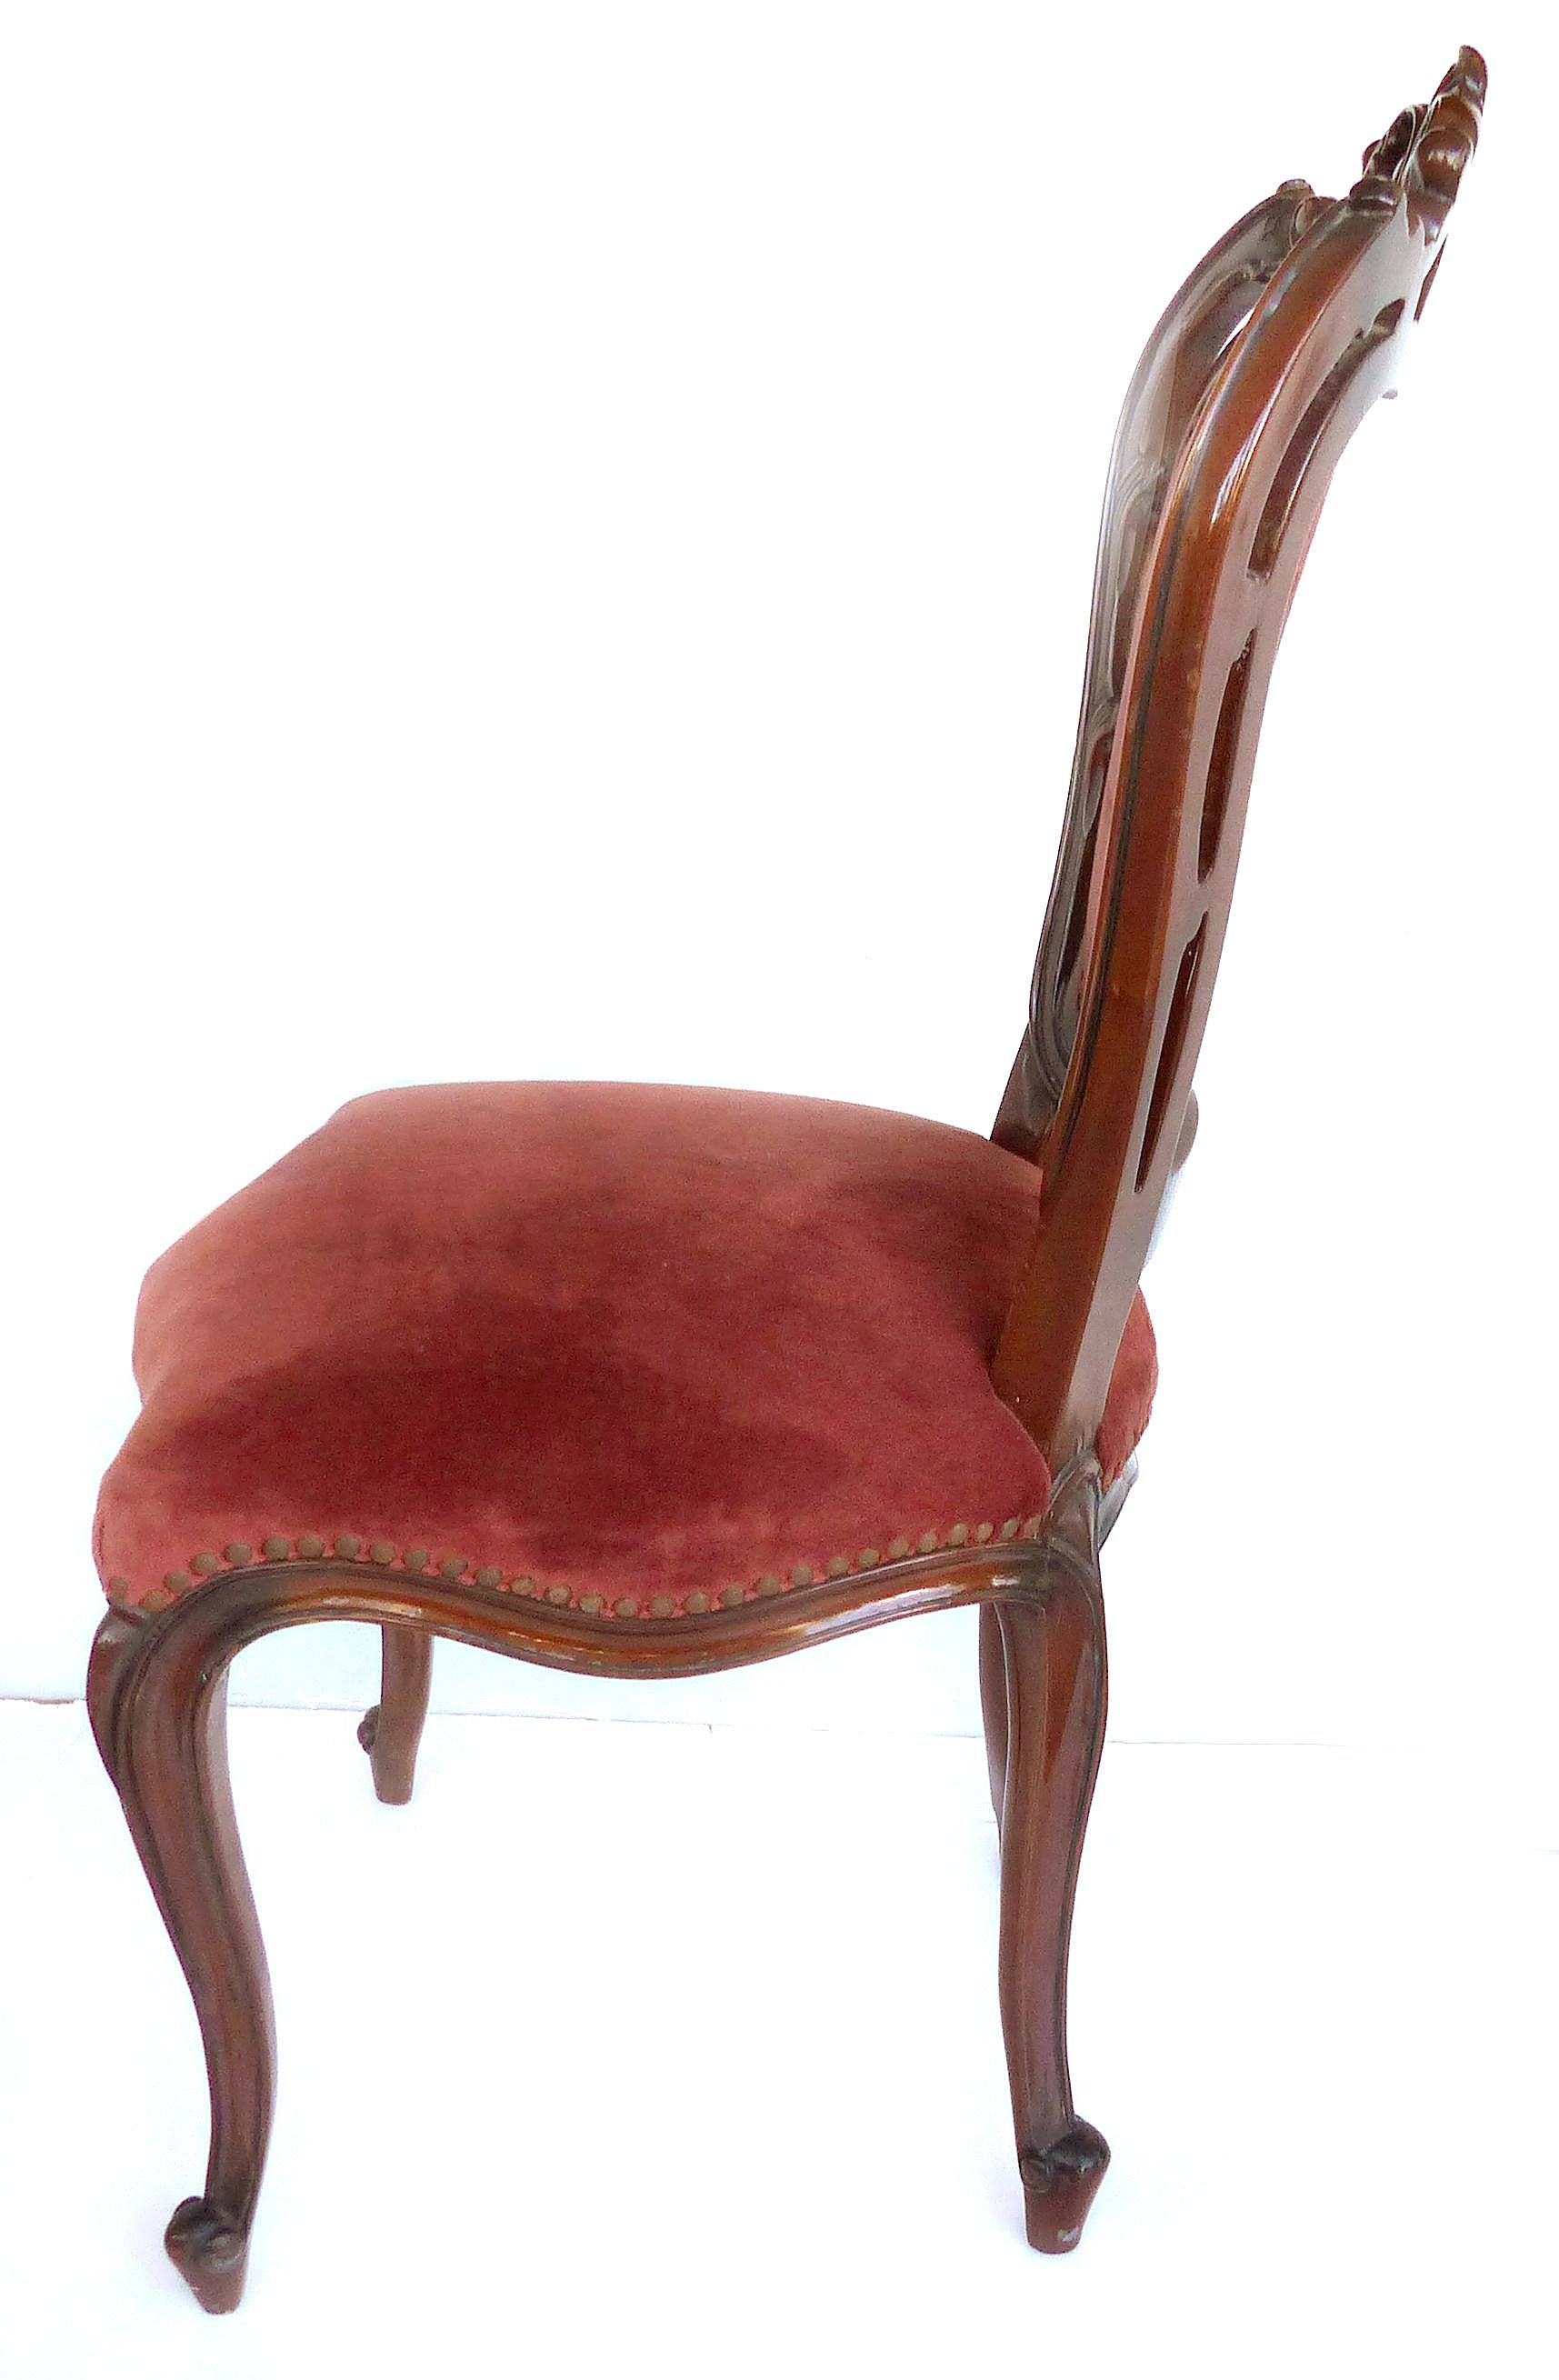 20th Century Louis XV Style Mahogany Dining Chairs with Carved Pierced Backs, Set of Six